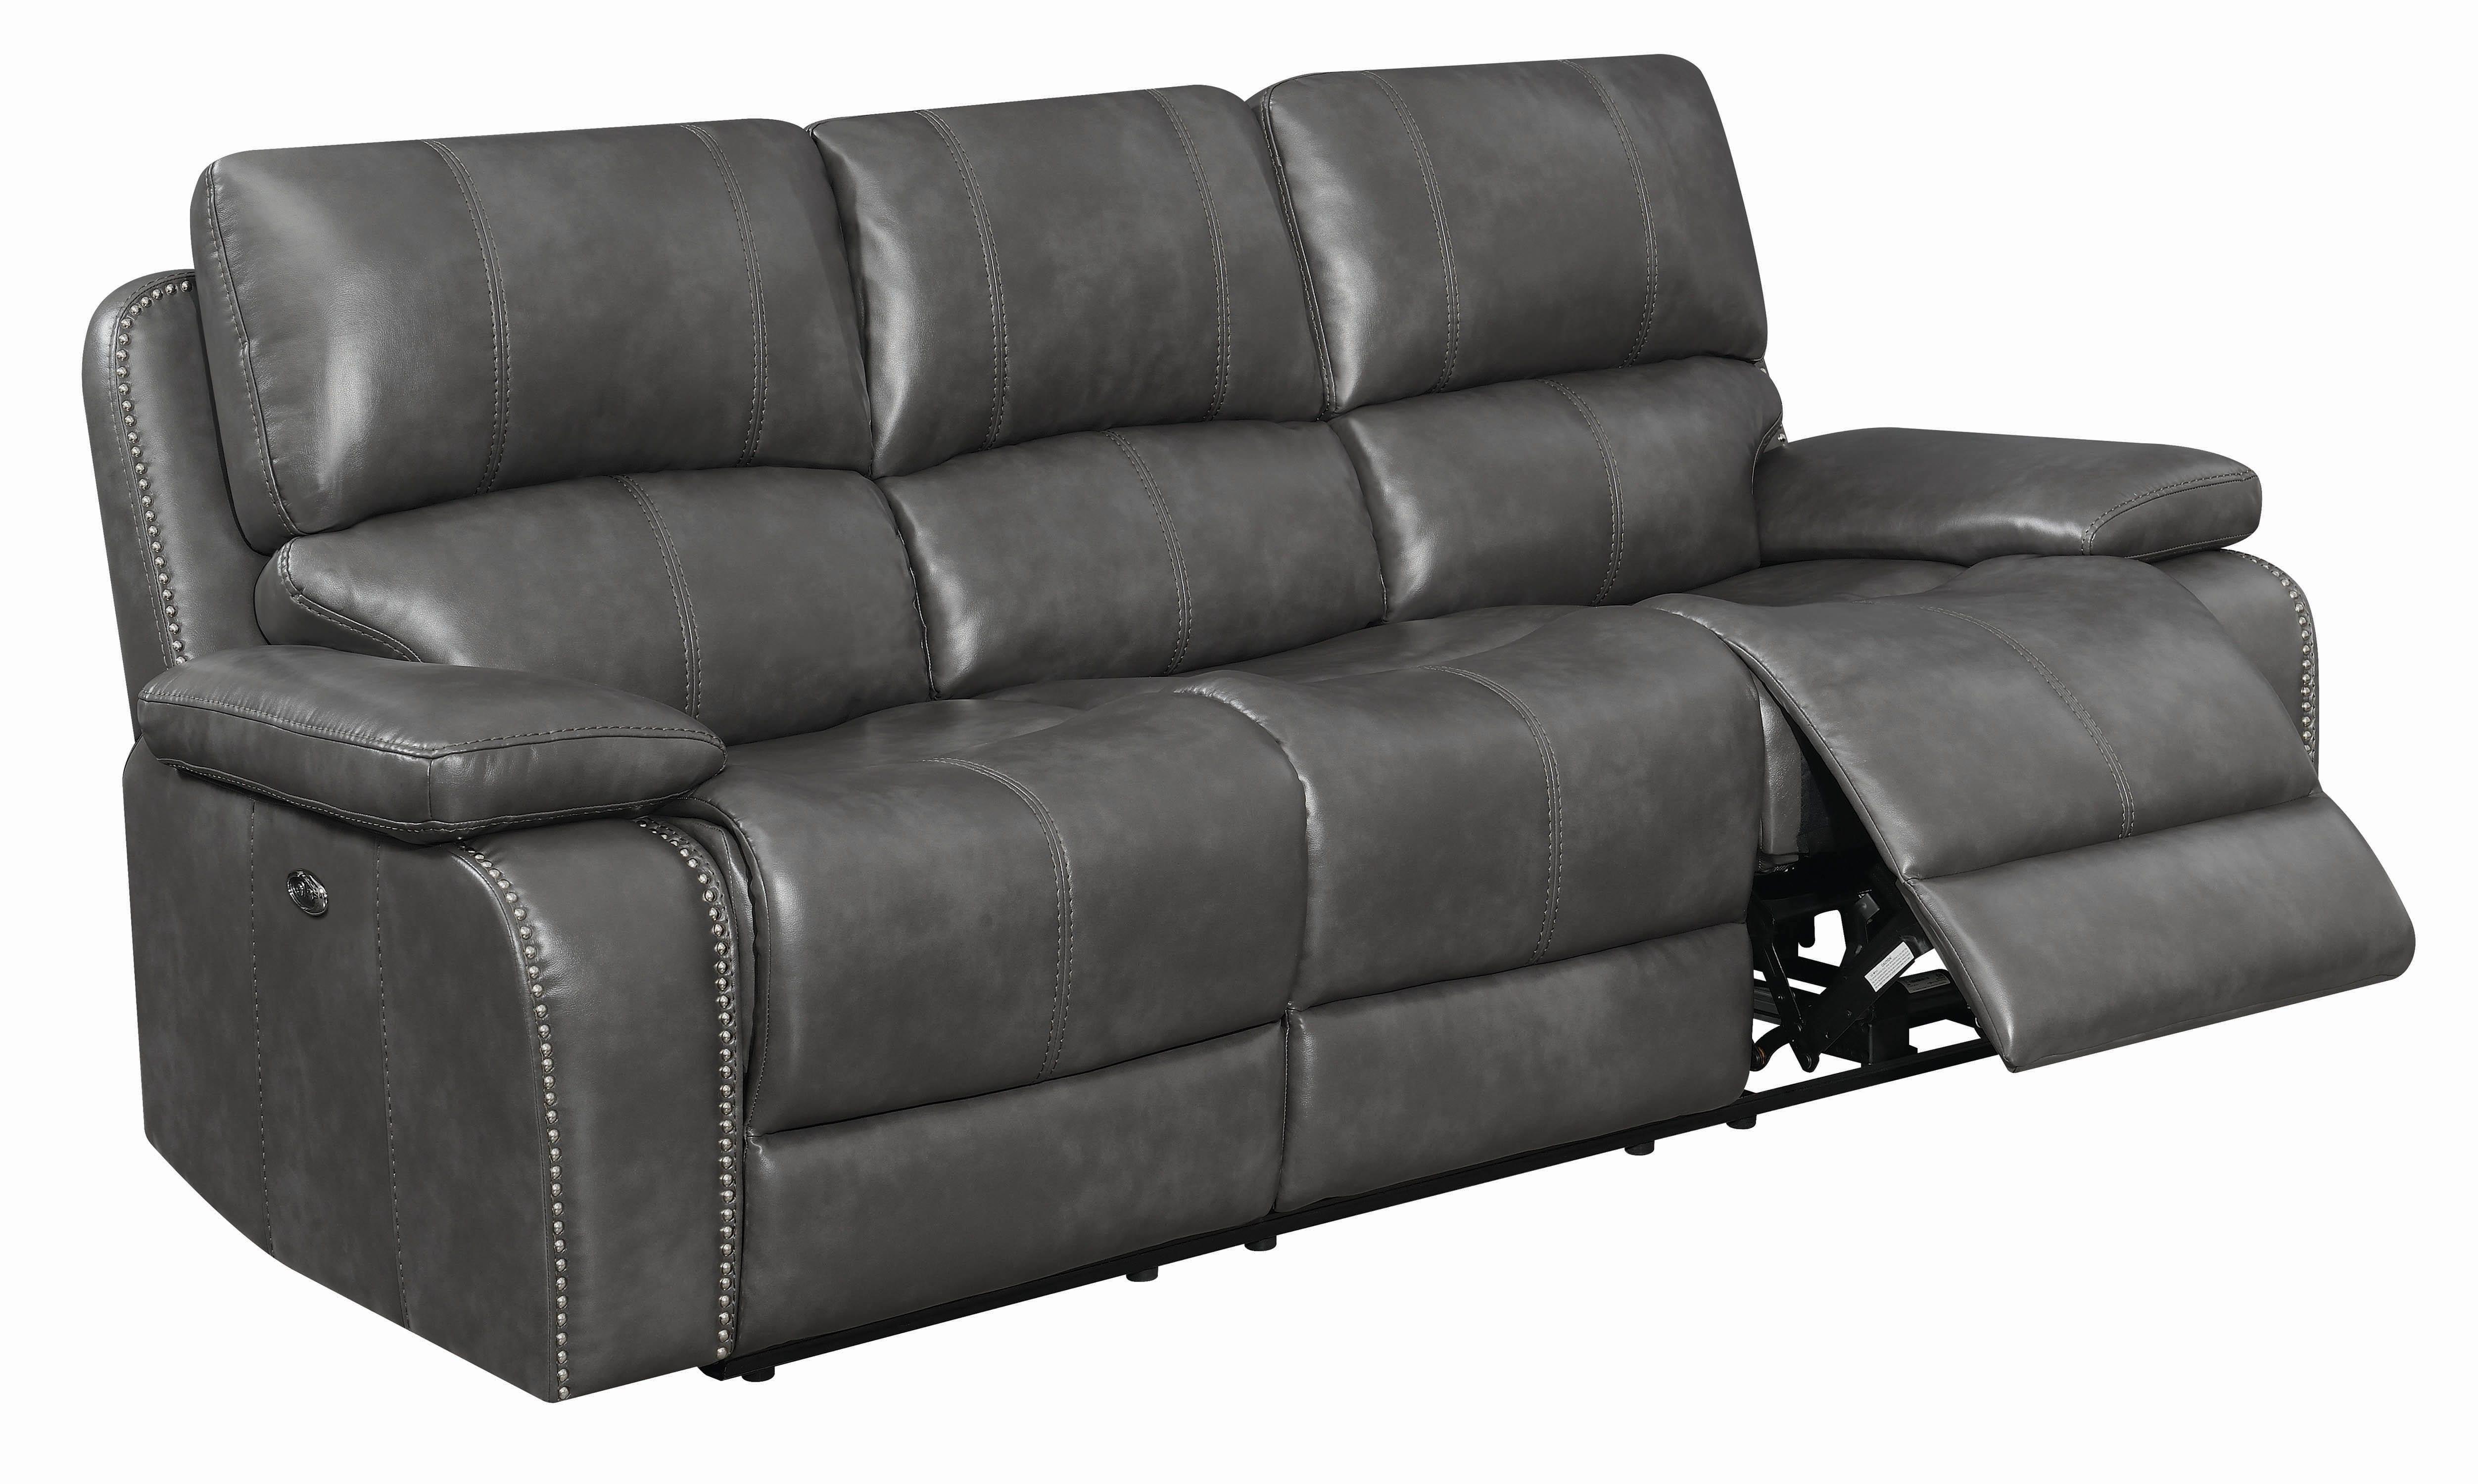 

    
603211 Modern Gray Leather Upholstery Motion sofa Ravenna by Coaster
